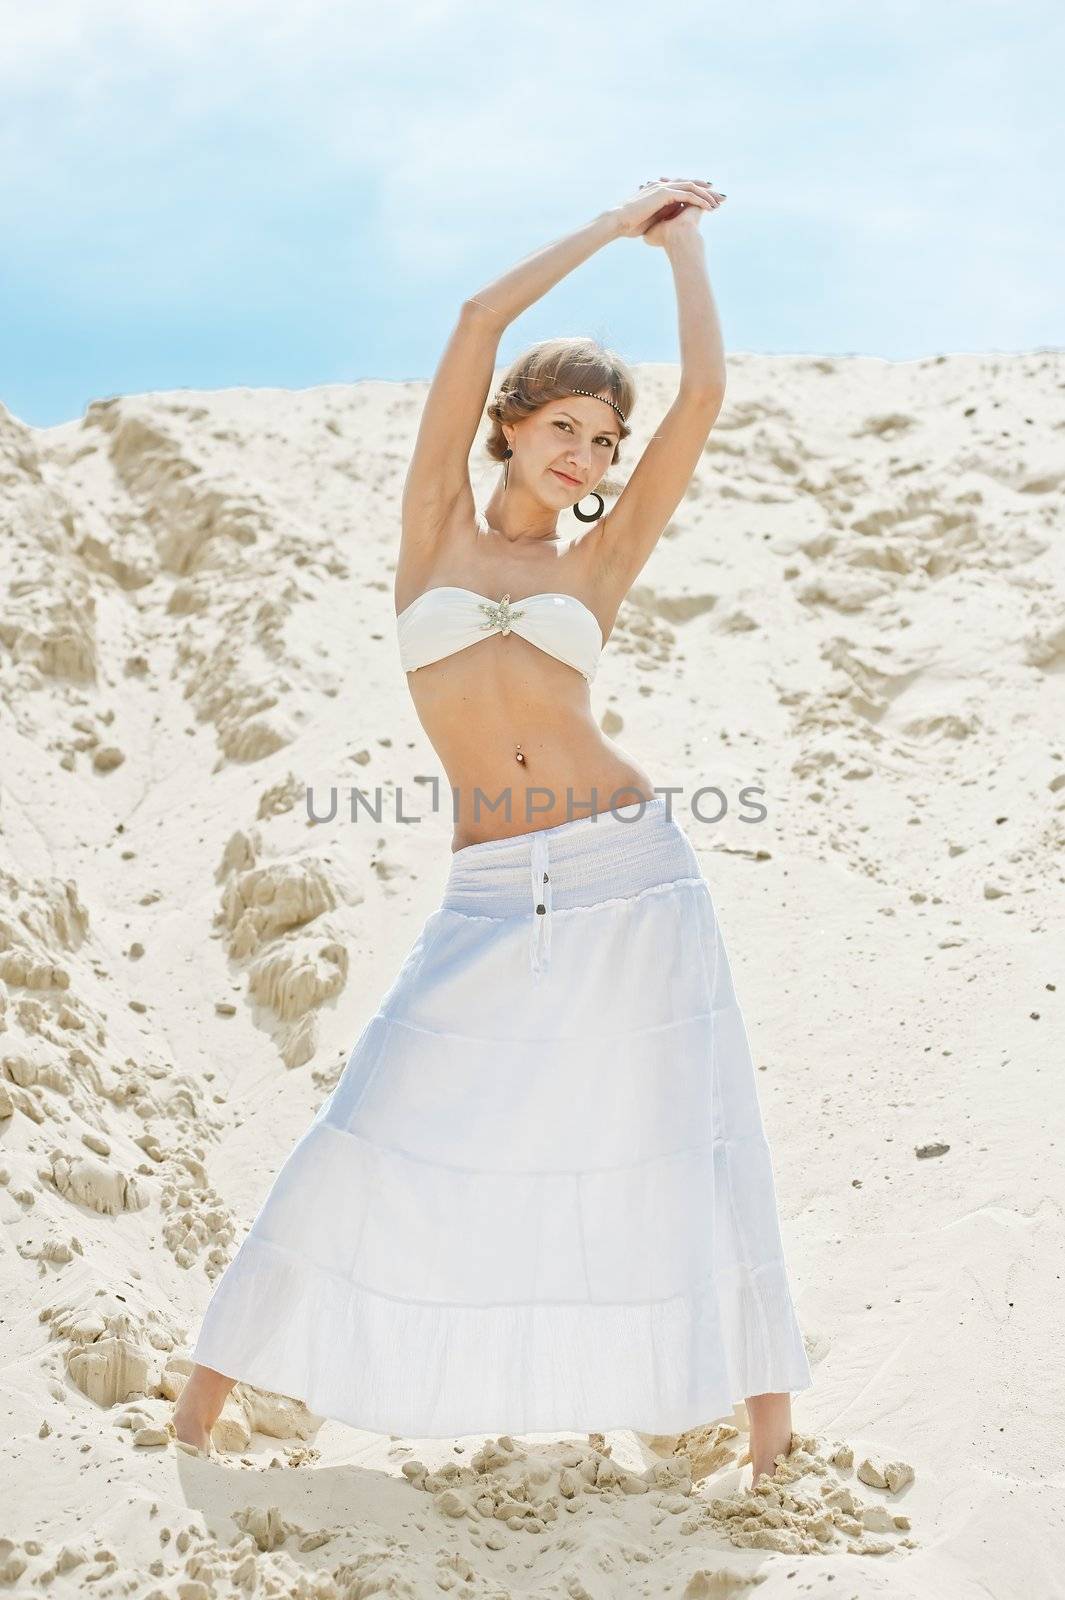 beautiful girl in a white skirt posing on a sand dune by kosmsos111